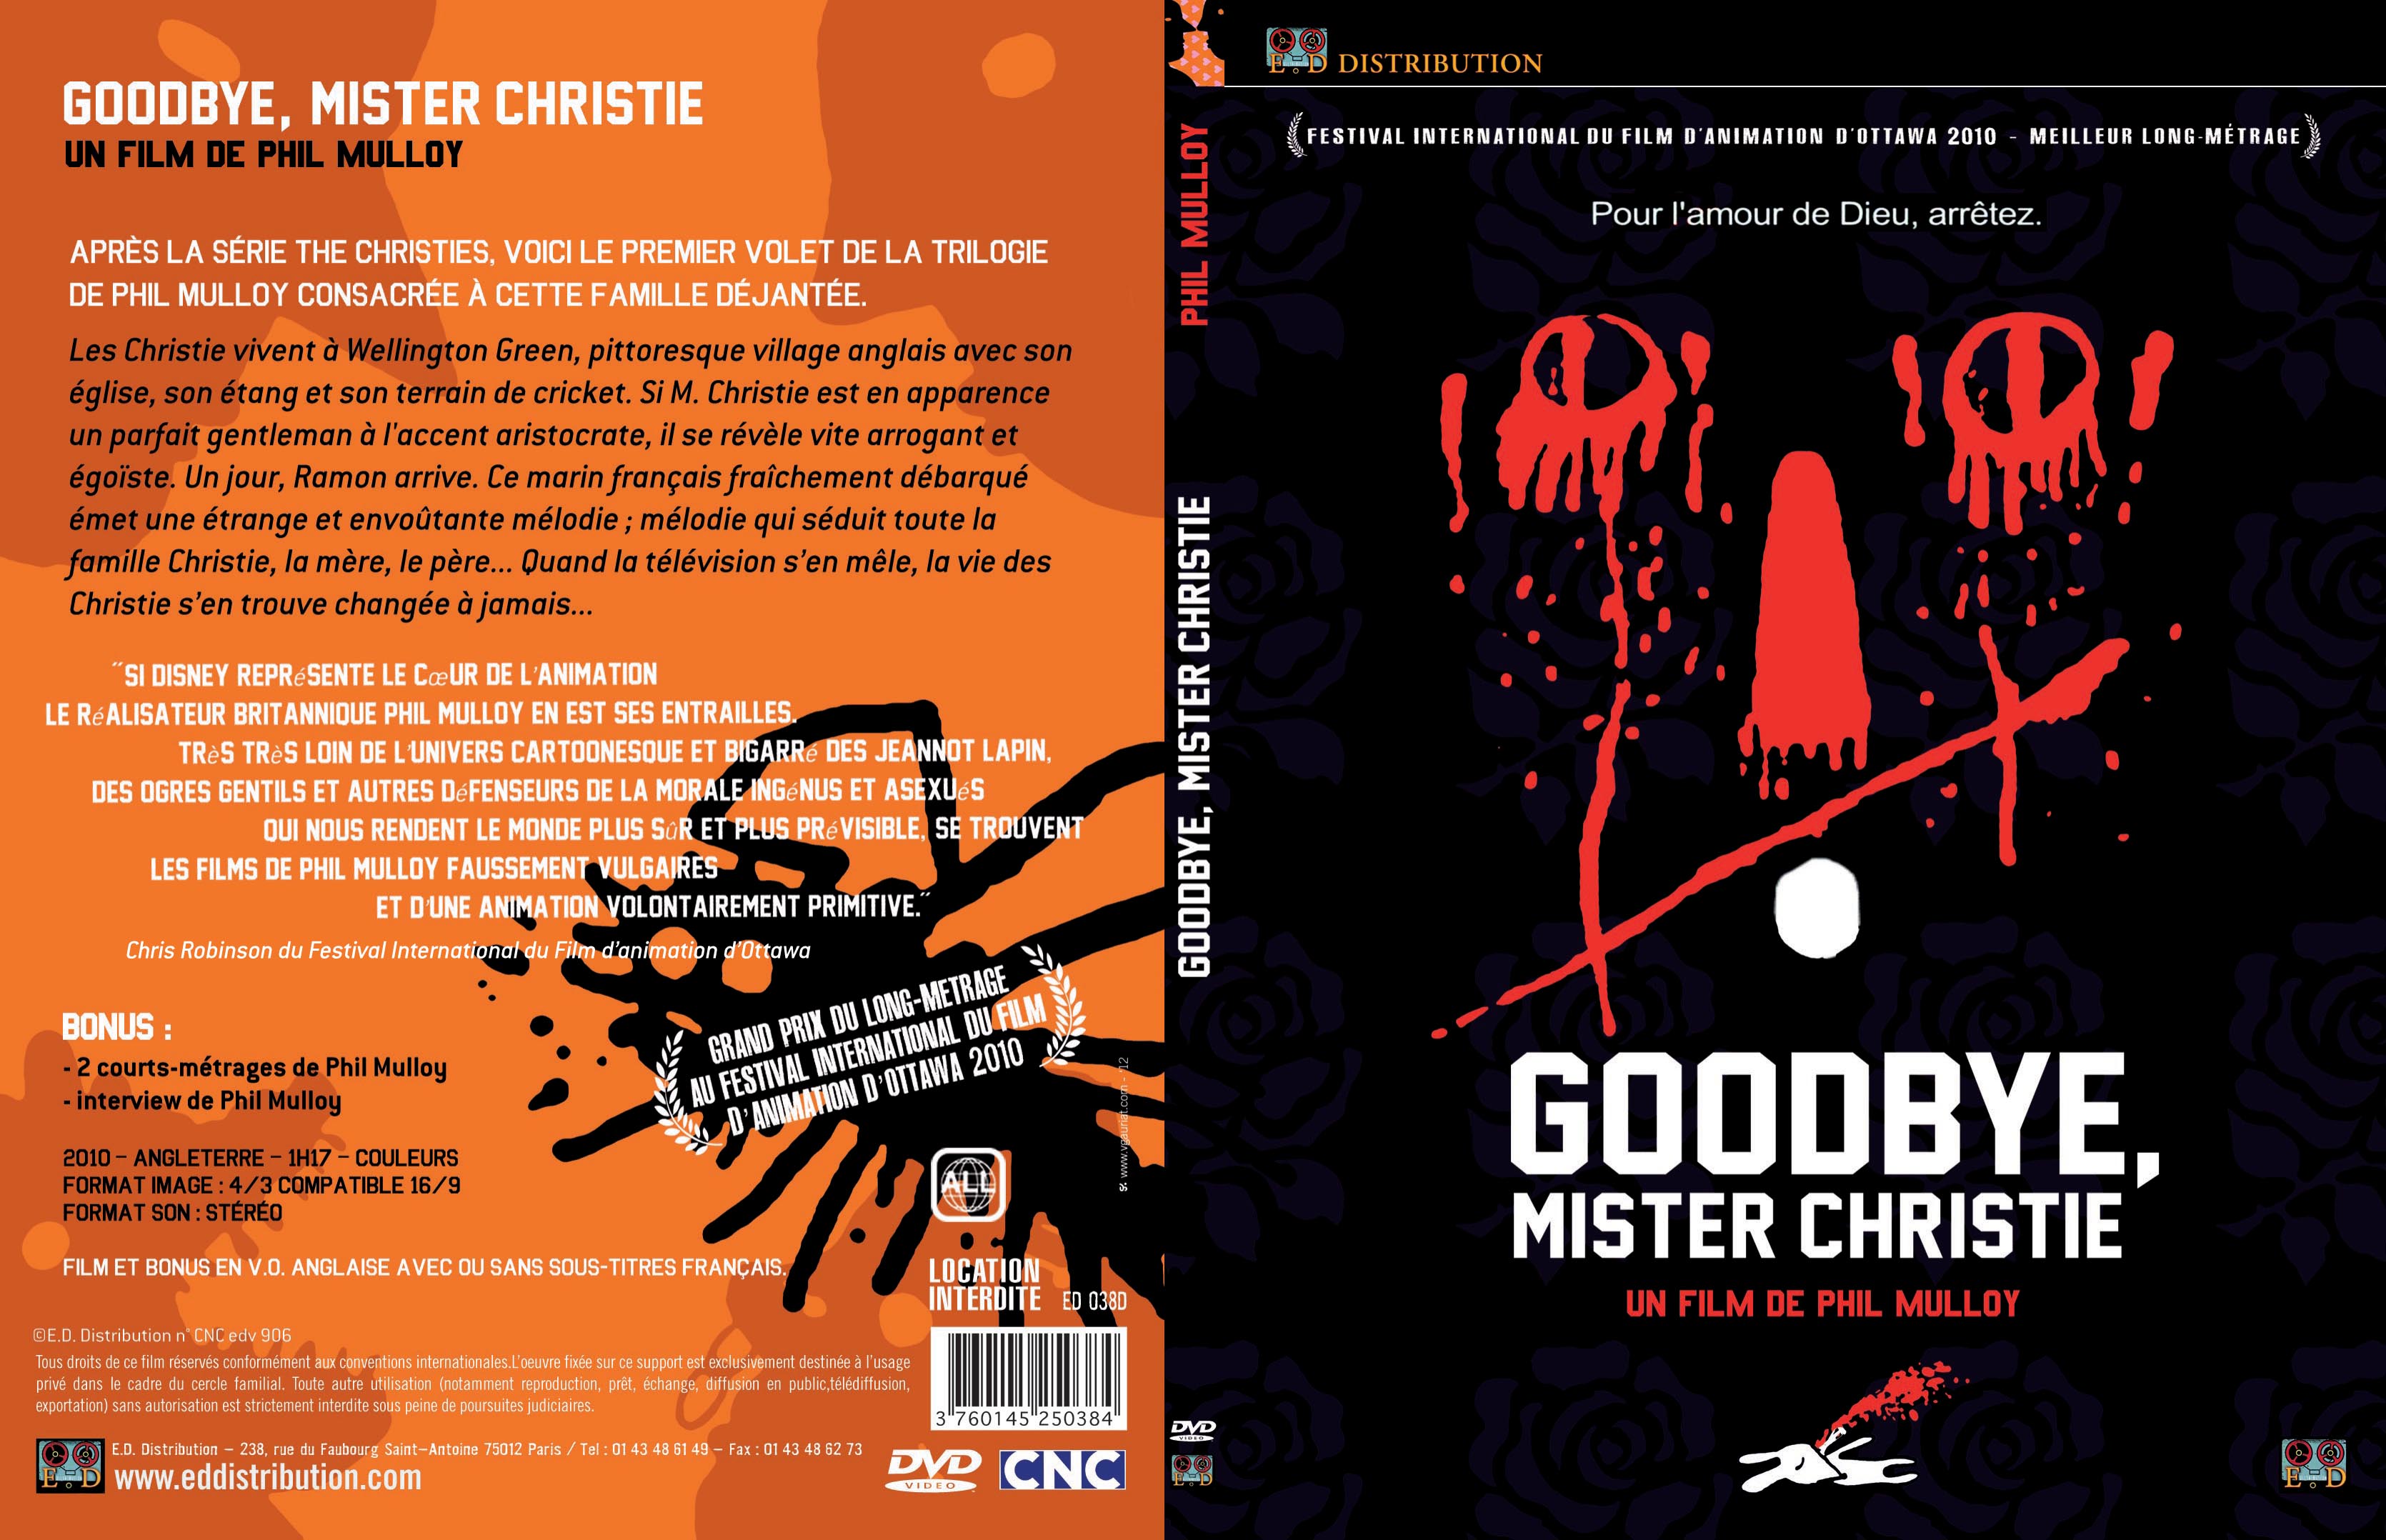 Jaquette DVD Goodbye mister christie